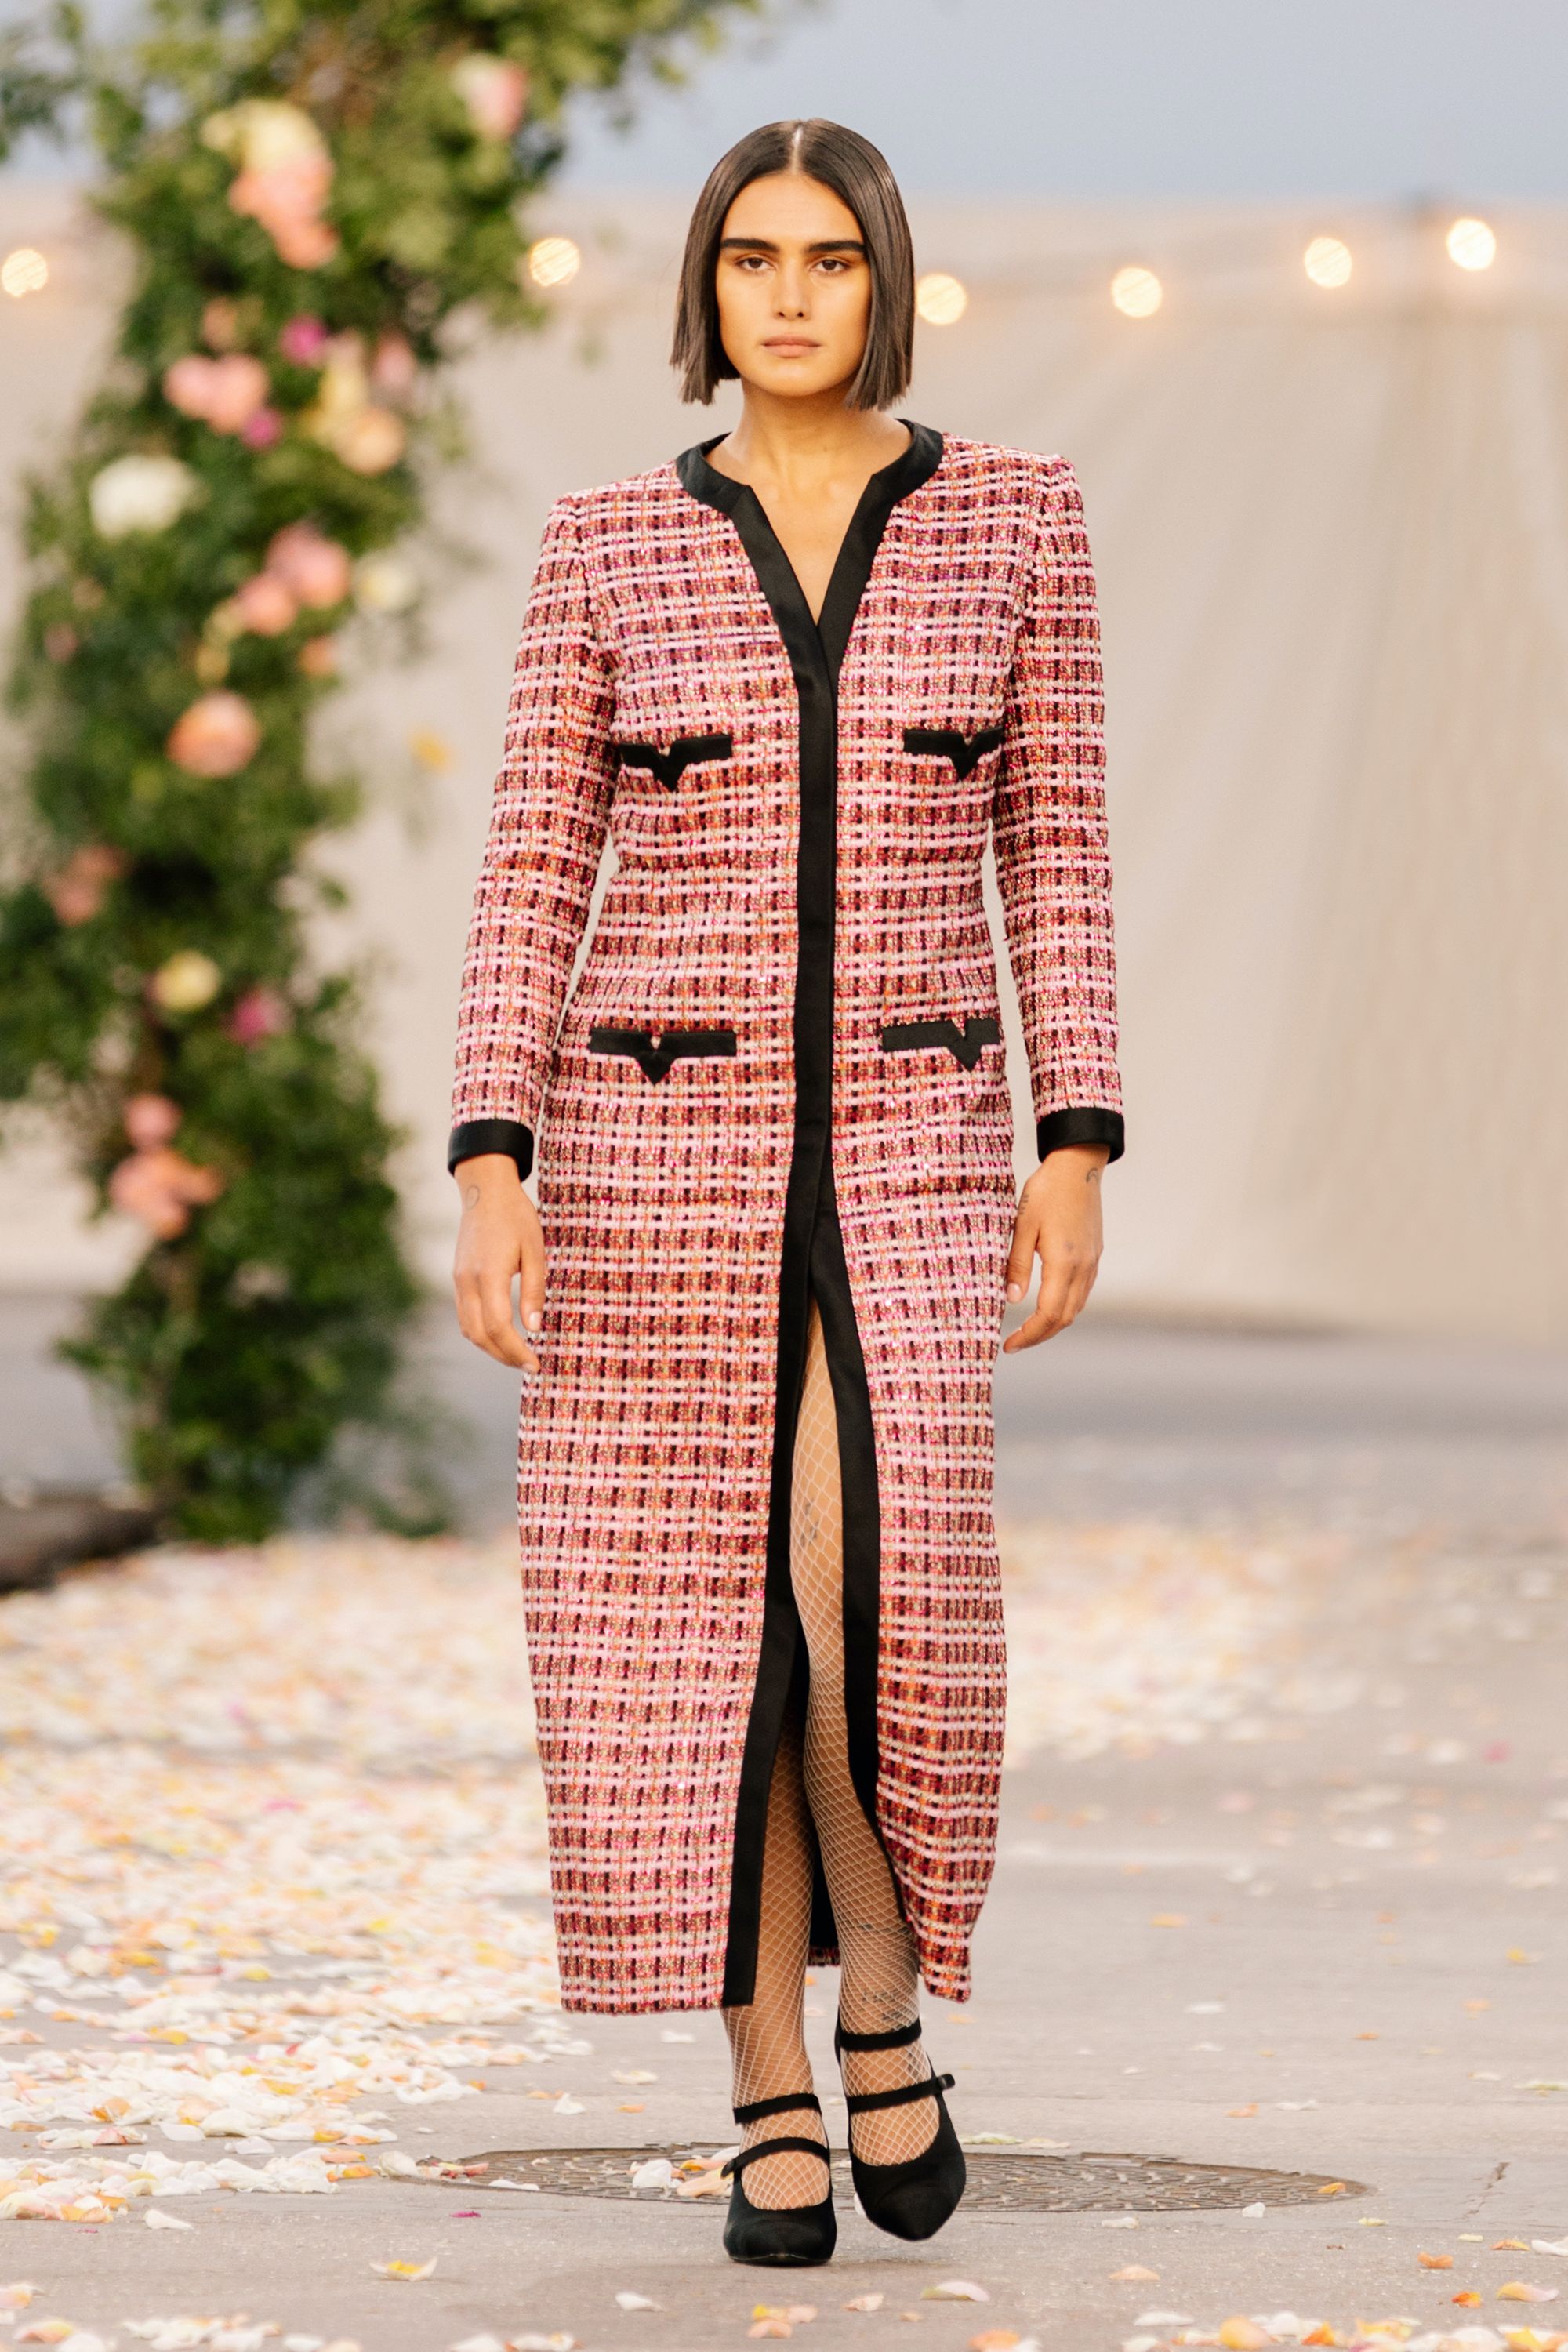 Chanel Fashion Collection Couture Spring Summer 2021 presented